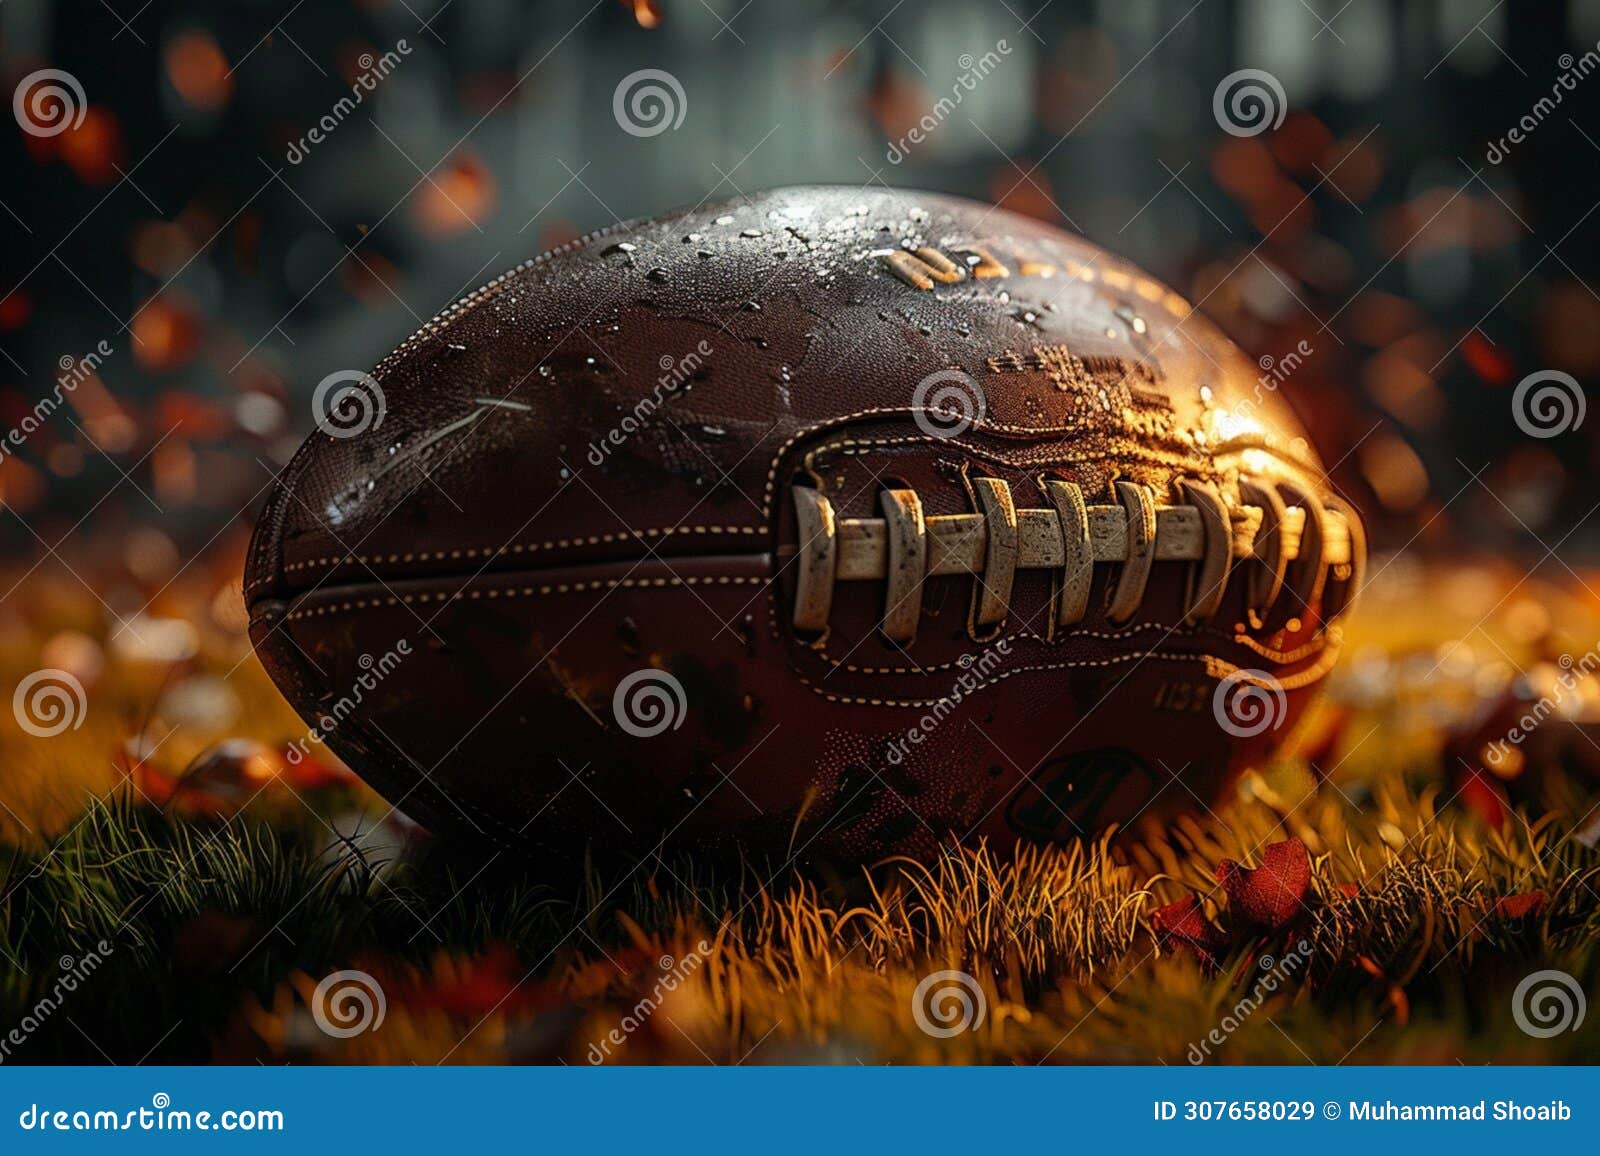 american football, crafted from leather, lays on vibrant turf